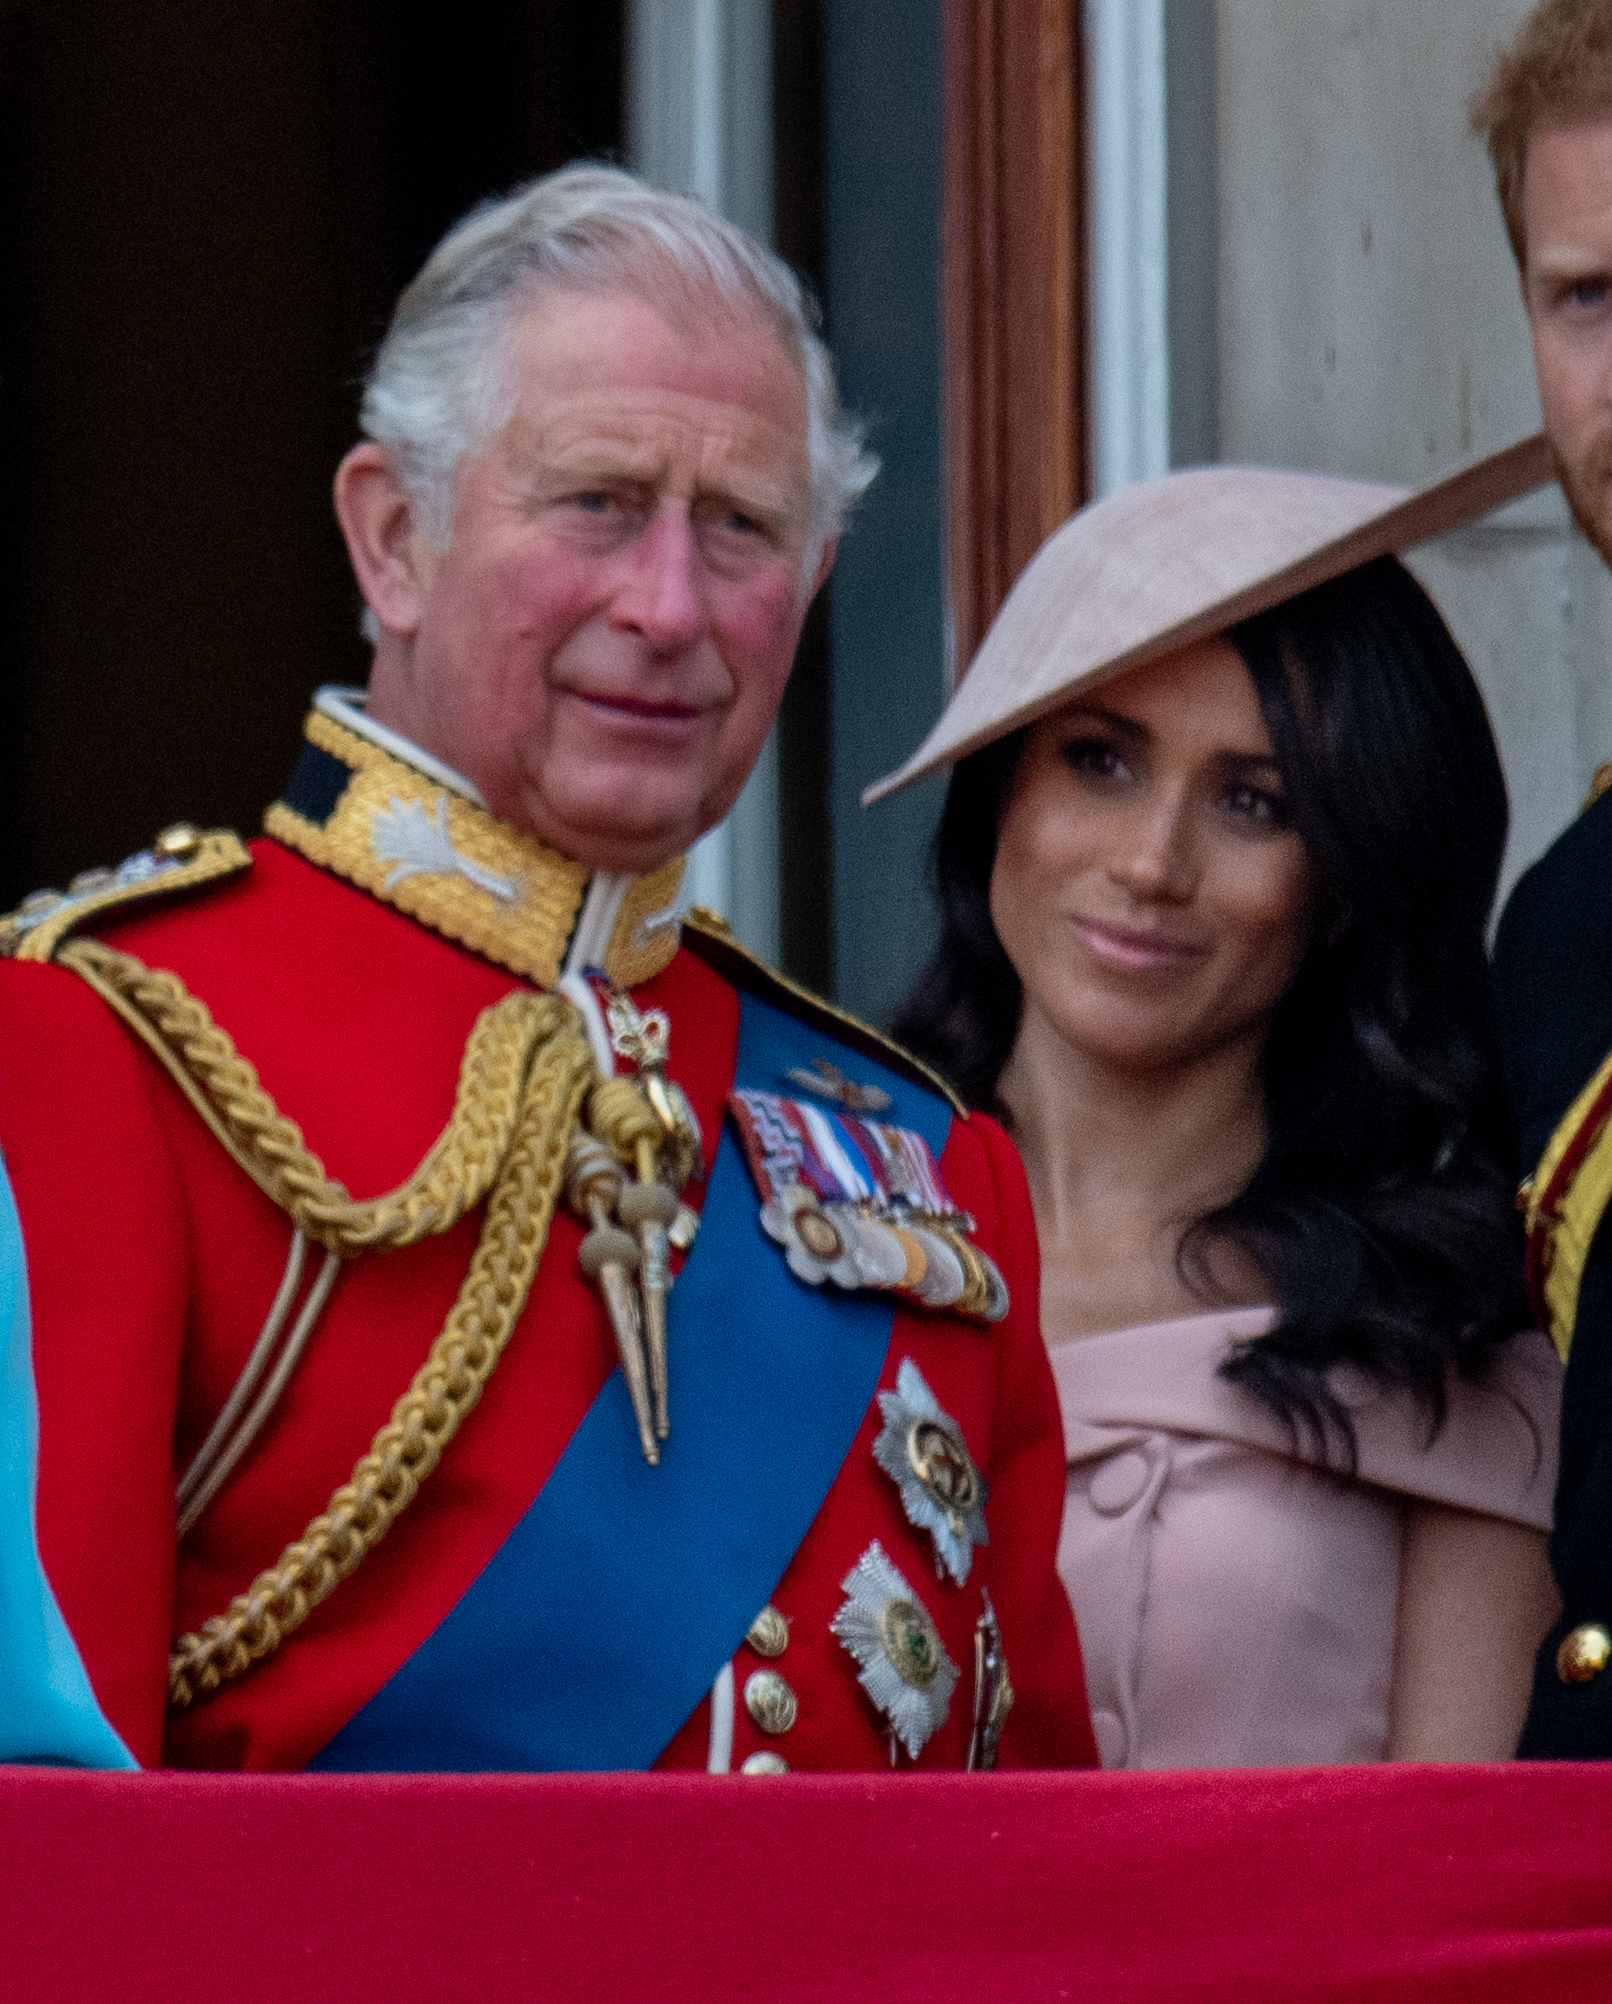 King Charles and Meghan, Duchess of Sussex during Trooping The Colour 2018 on June 9, 2018 in Windsor, England | Source: Getty Images